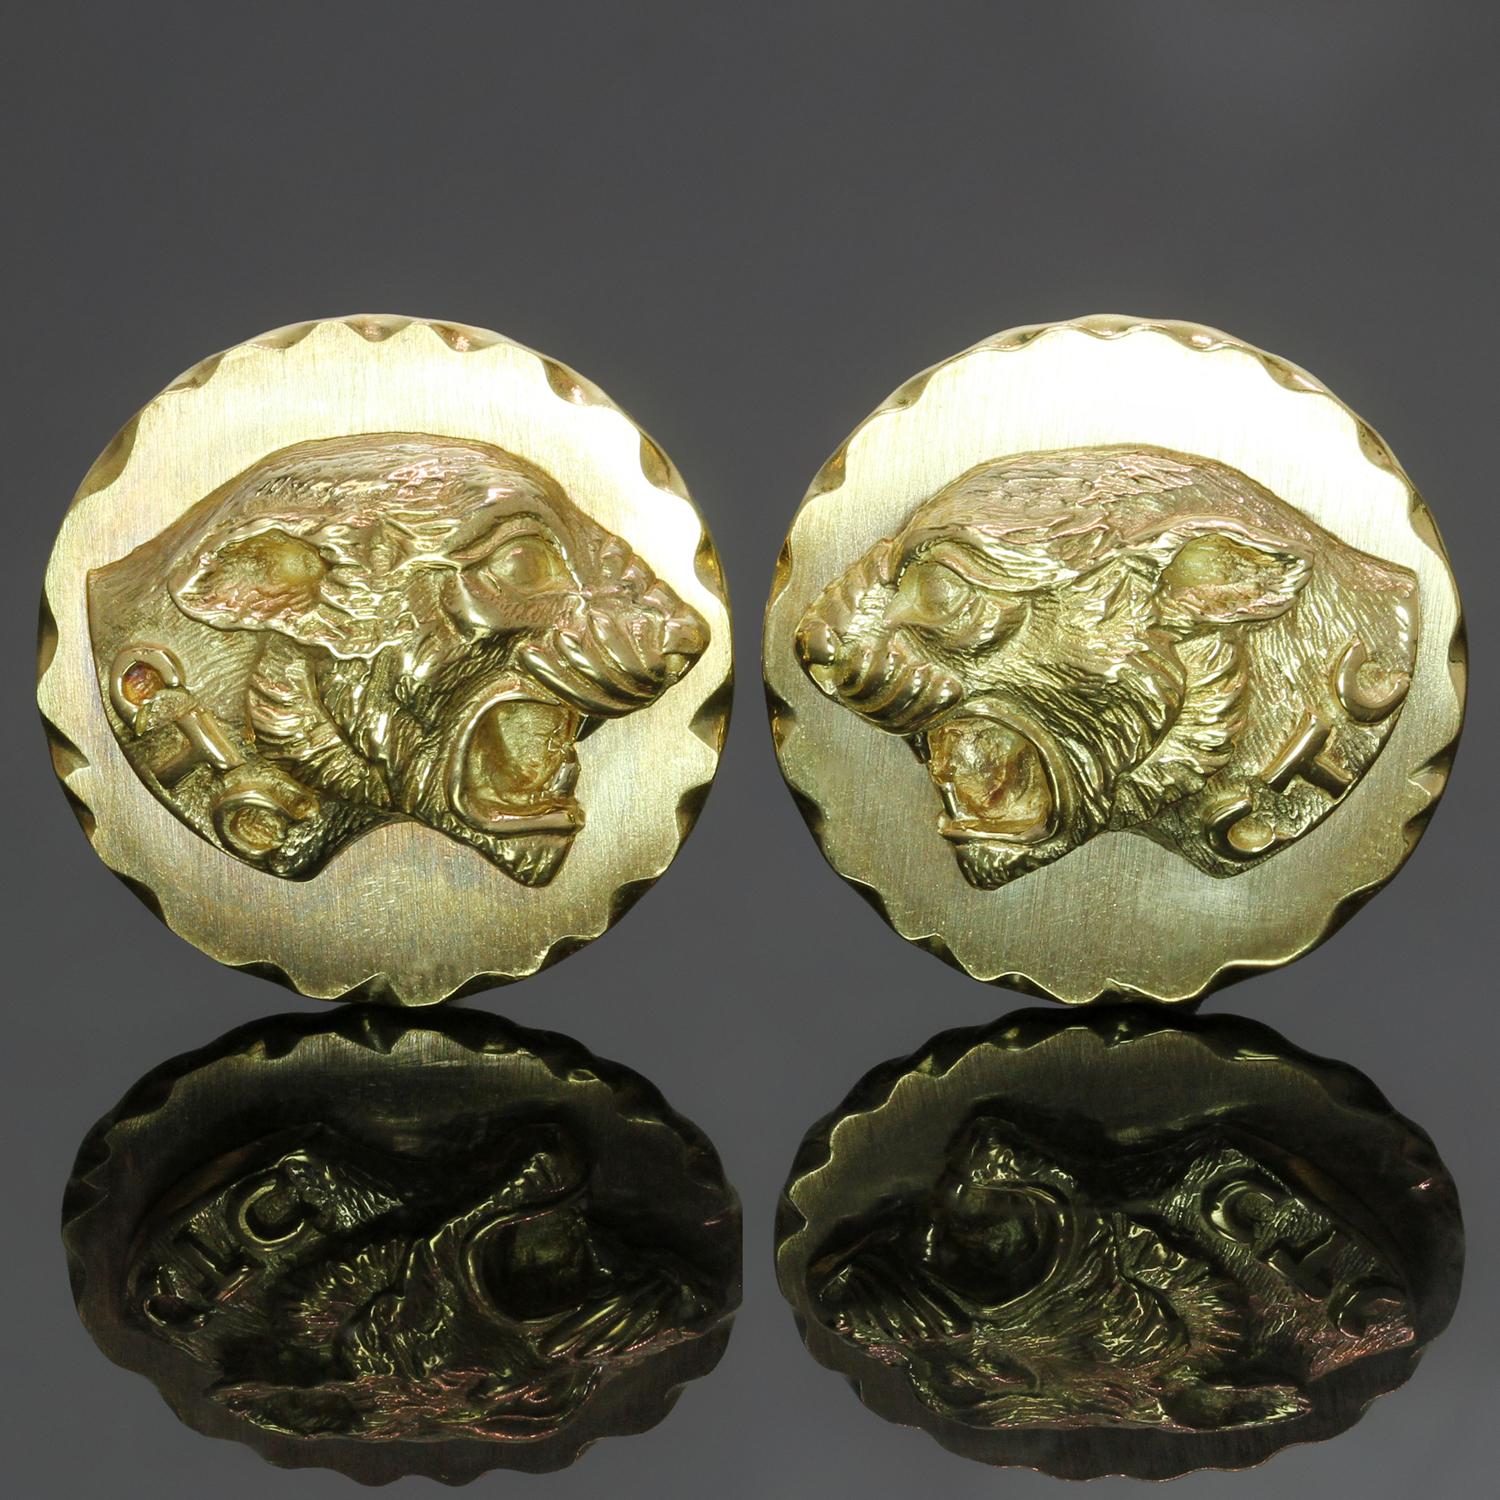 These vintage Van Cleef & Arpels round cufflinks feature a stunning motif of fierce panthers crafted in 18k yellow brushed and polished gold. Made in France circa 1970s. Measurements: 0.78